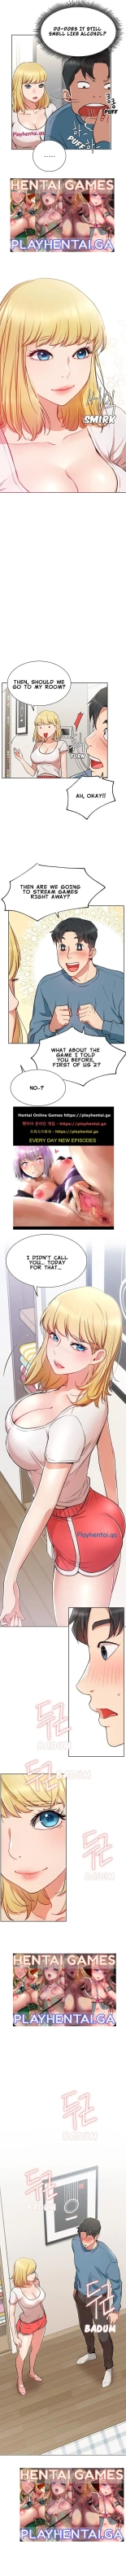 LIVE WITH : DO YOU WANT TO DO IT Ch. 13 : page 7